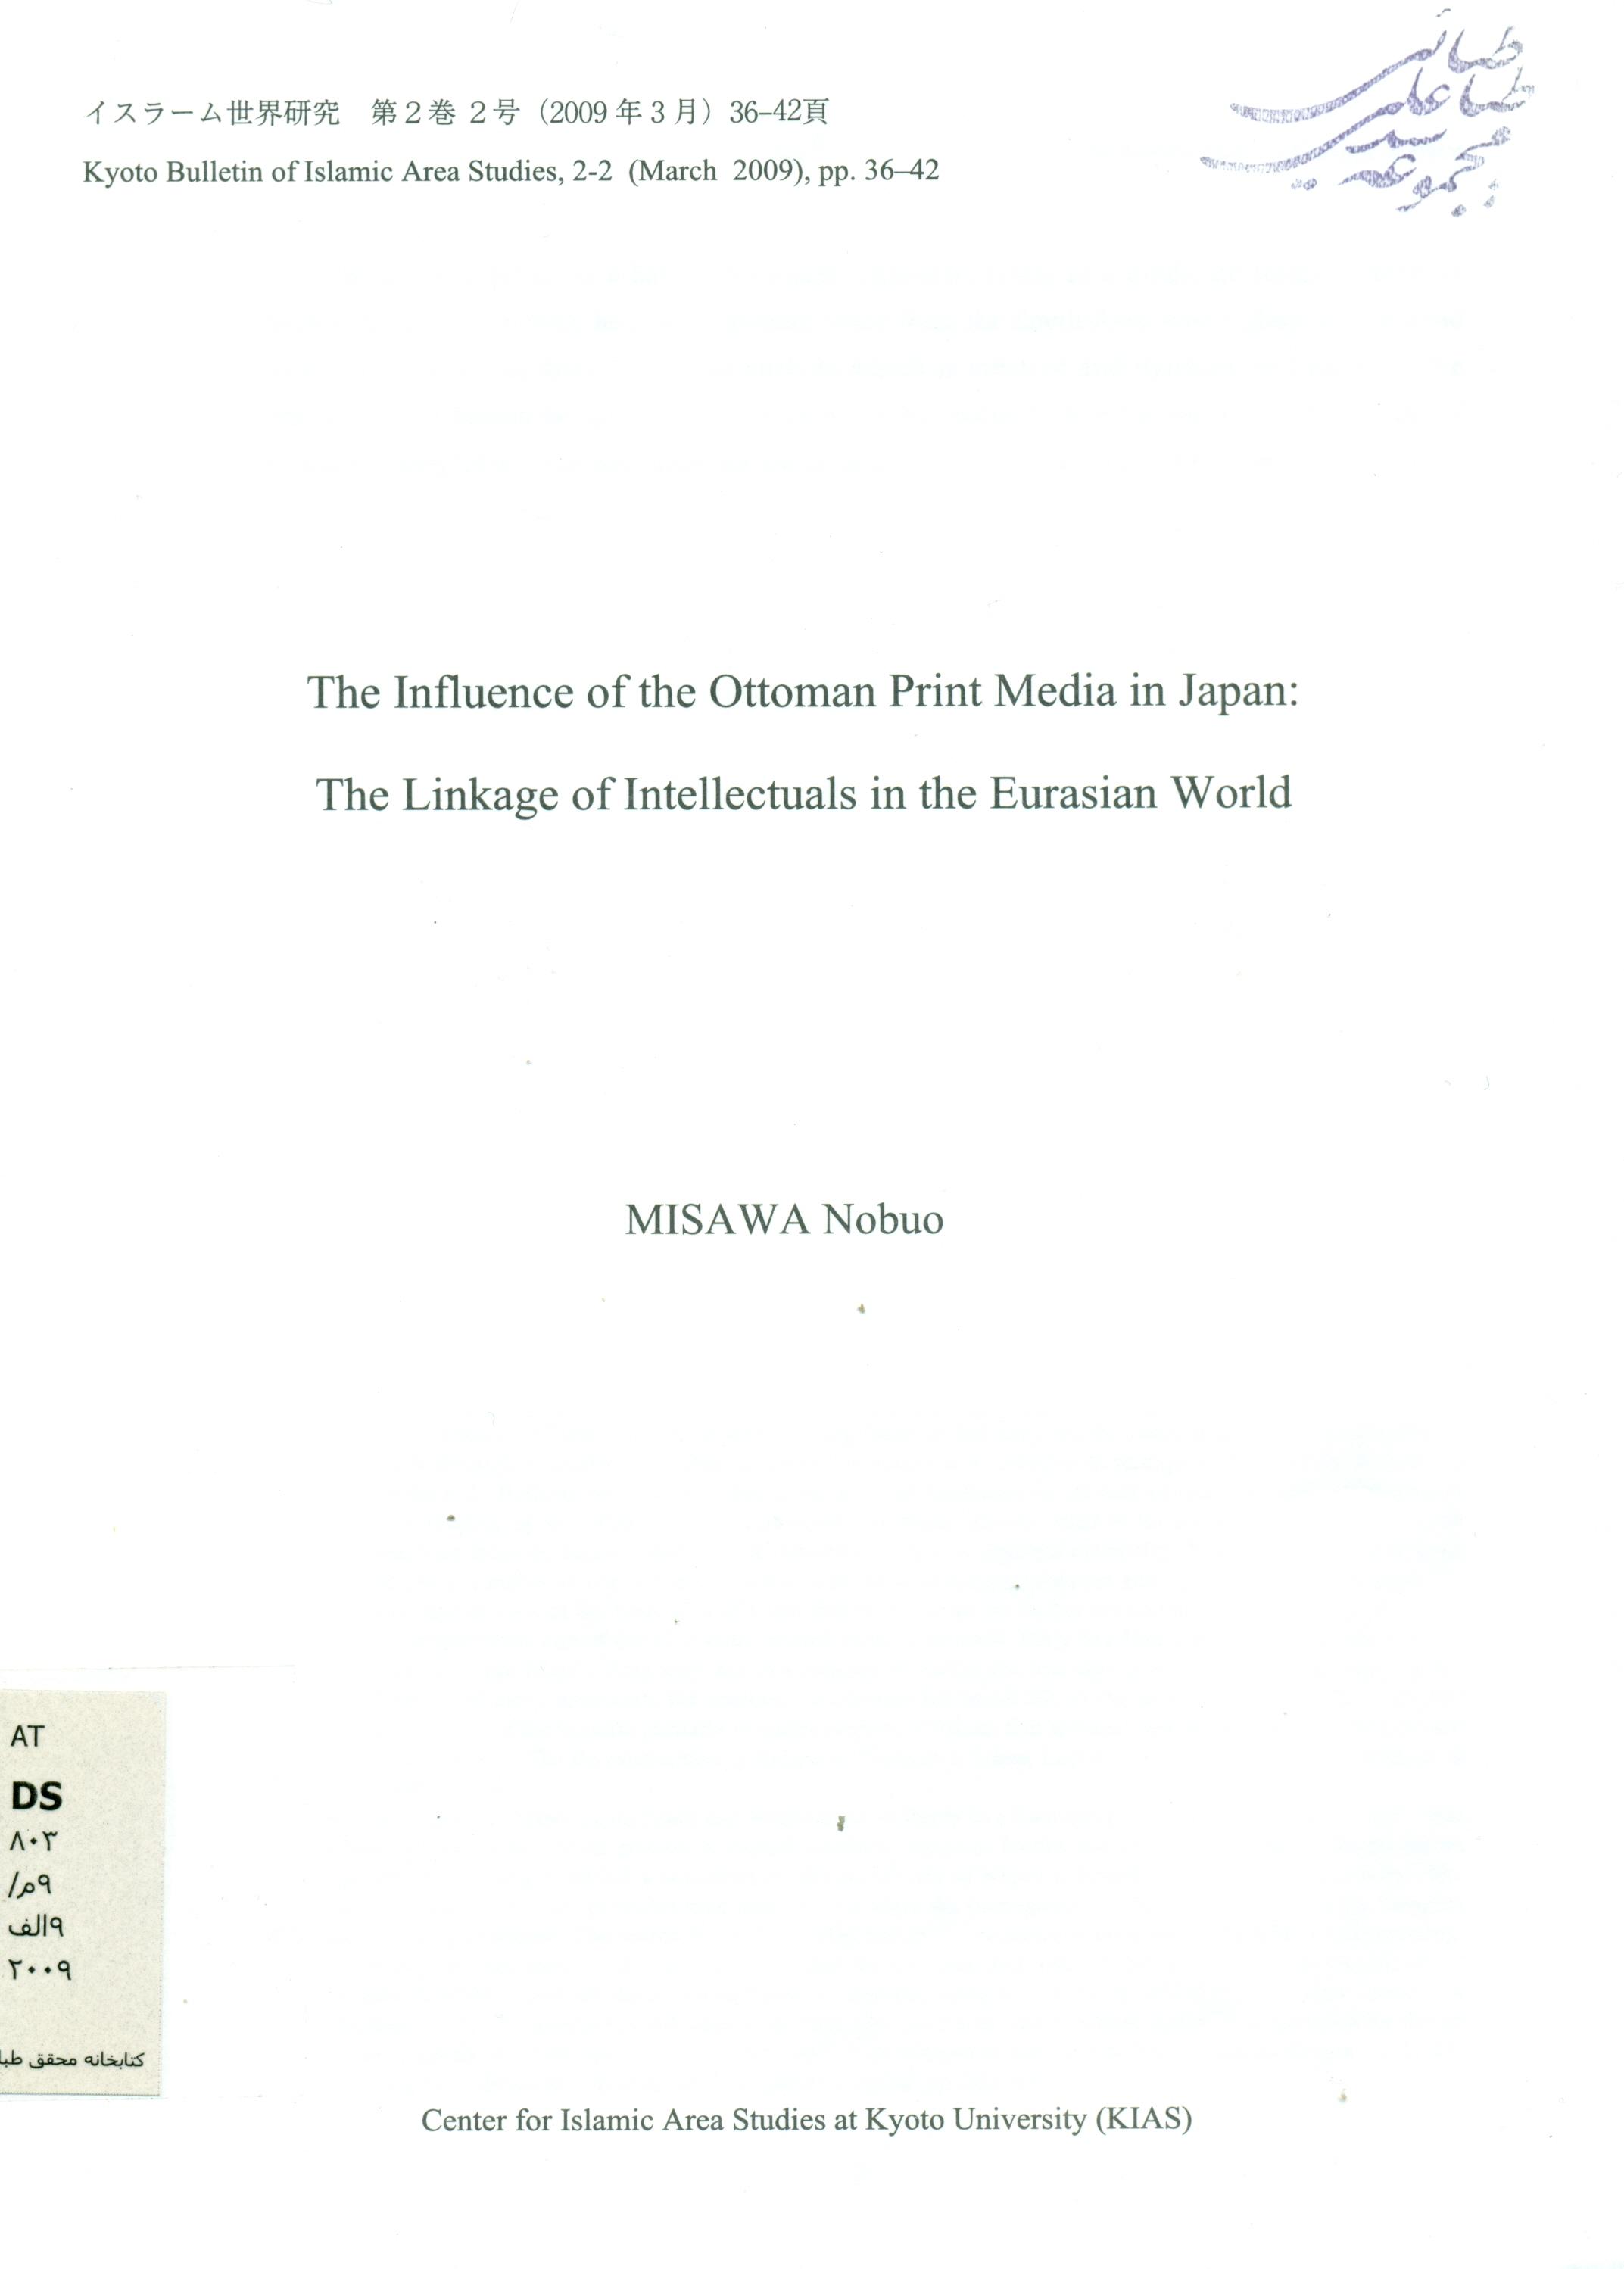 The influence of the ottoman print media in Japan